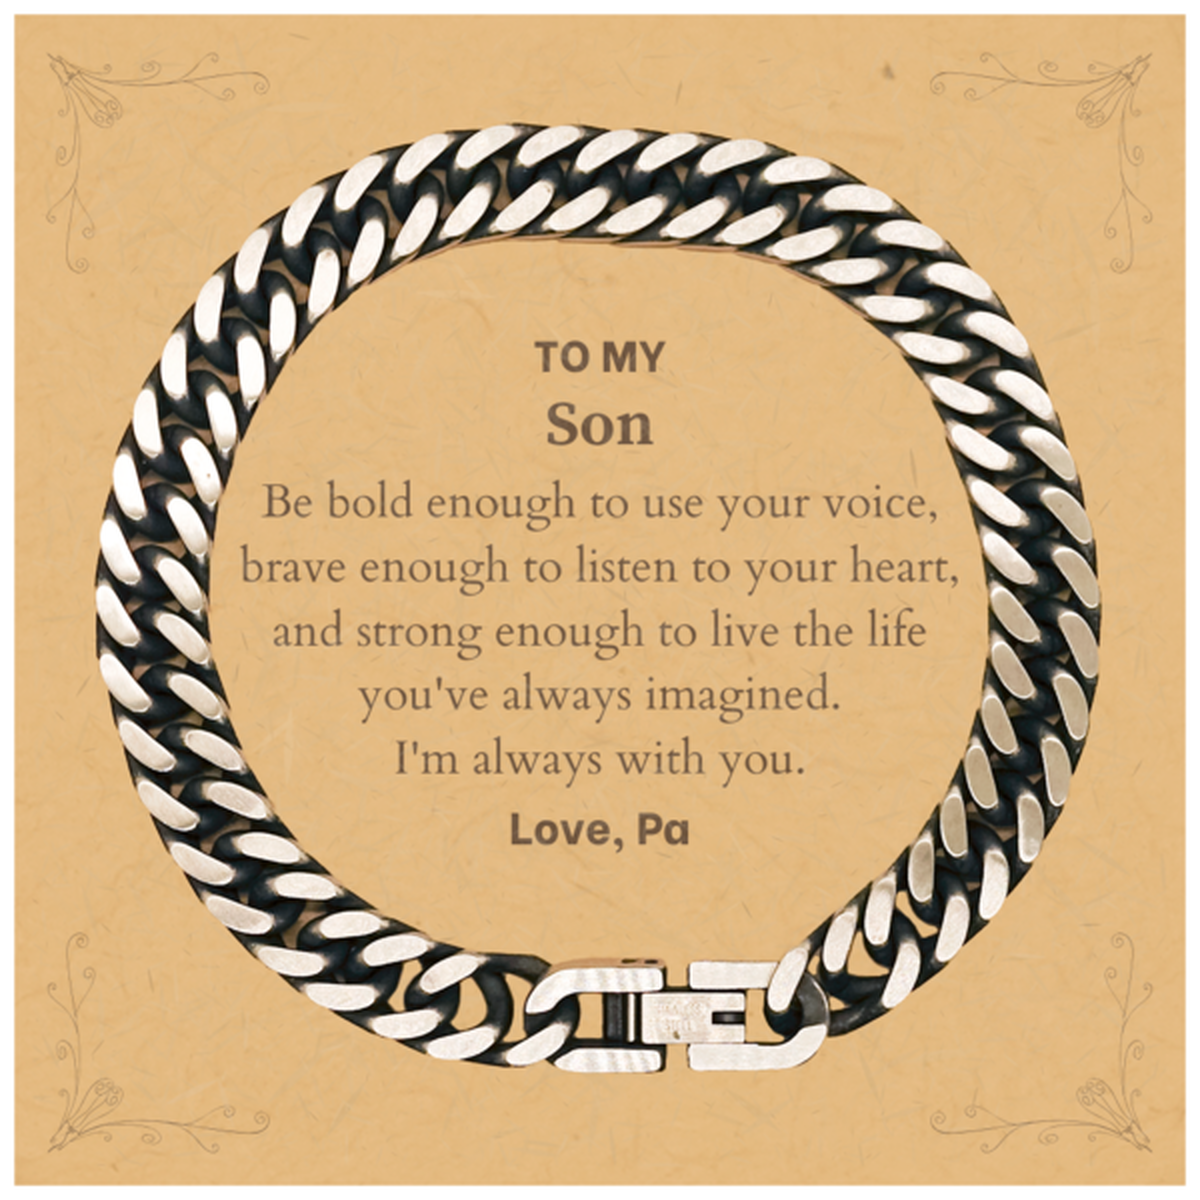 Keepsake Son Cuban Link Chain Bracelet Gift Idea Graduation Christmas Birthday Son from Pa, Son Be bold enough to use your voice, brave enough to listen to your heart. Love, Pa